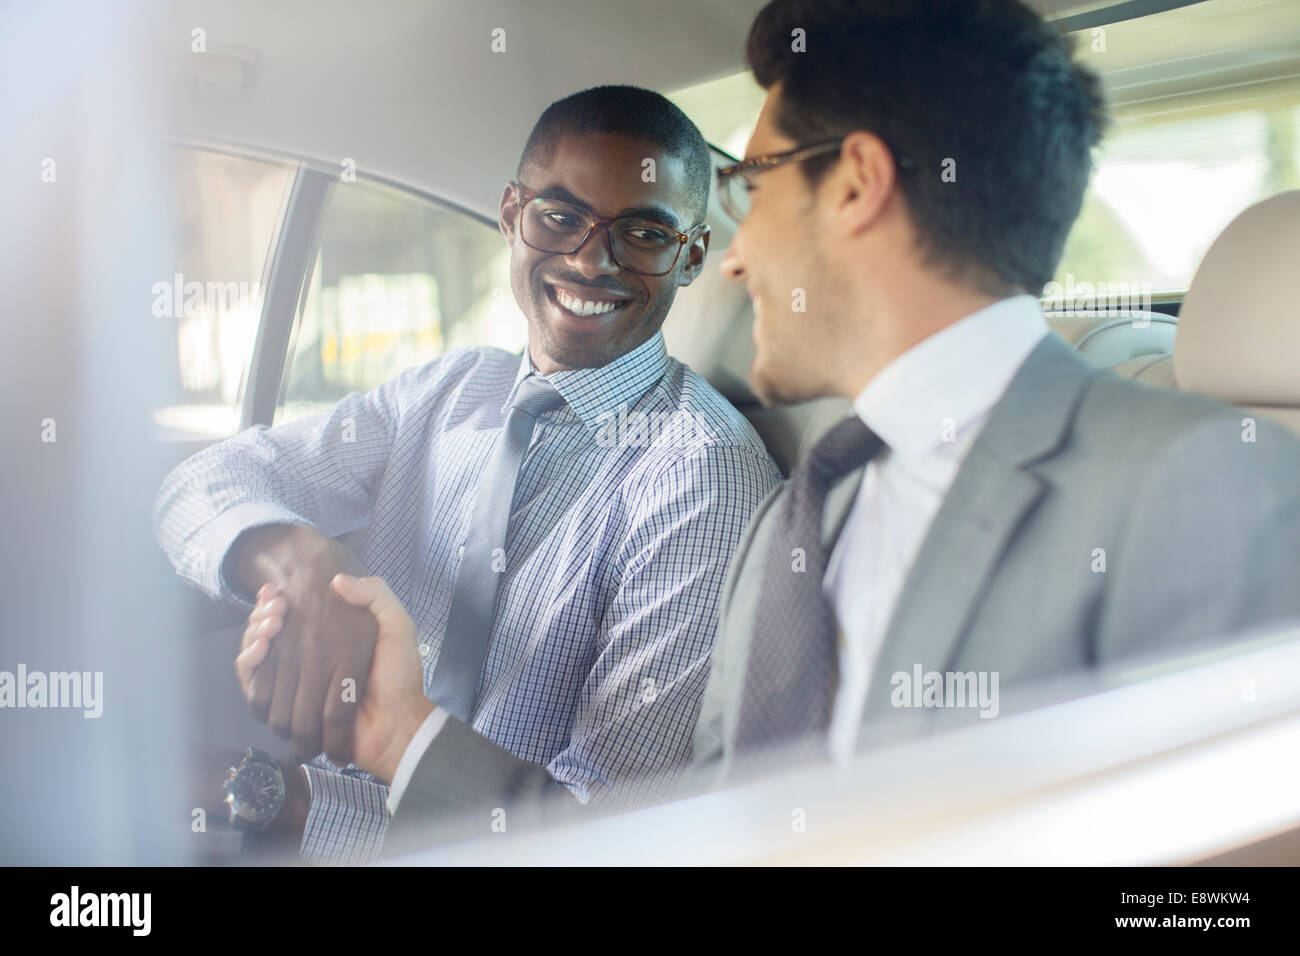 Smiling businessmen shaking hands in car Stock Photo